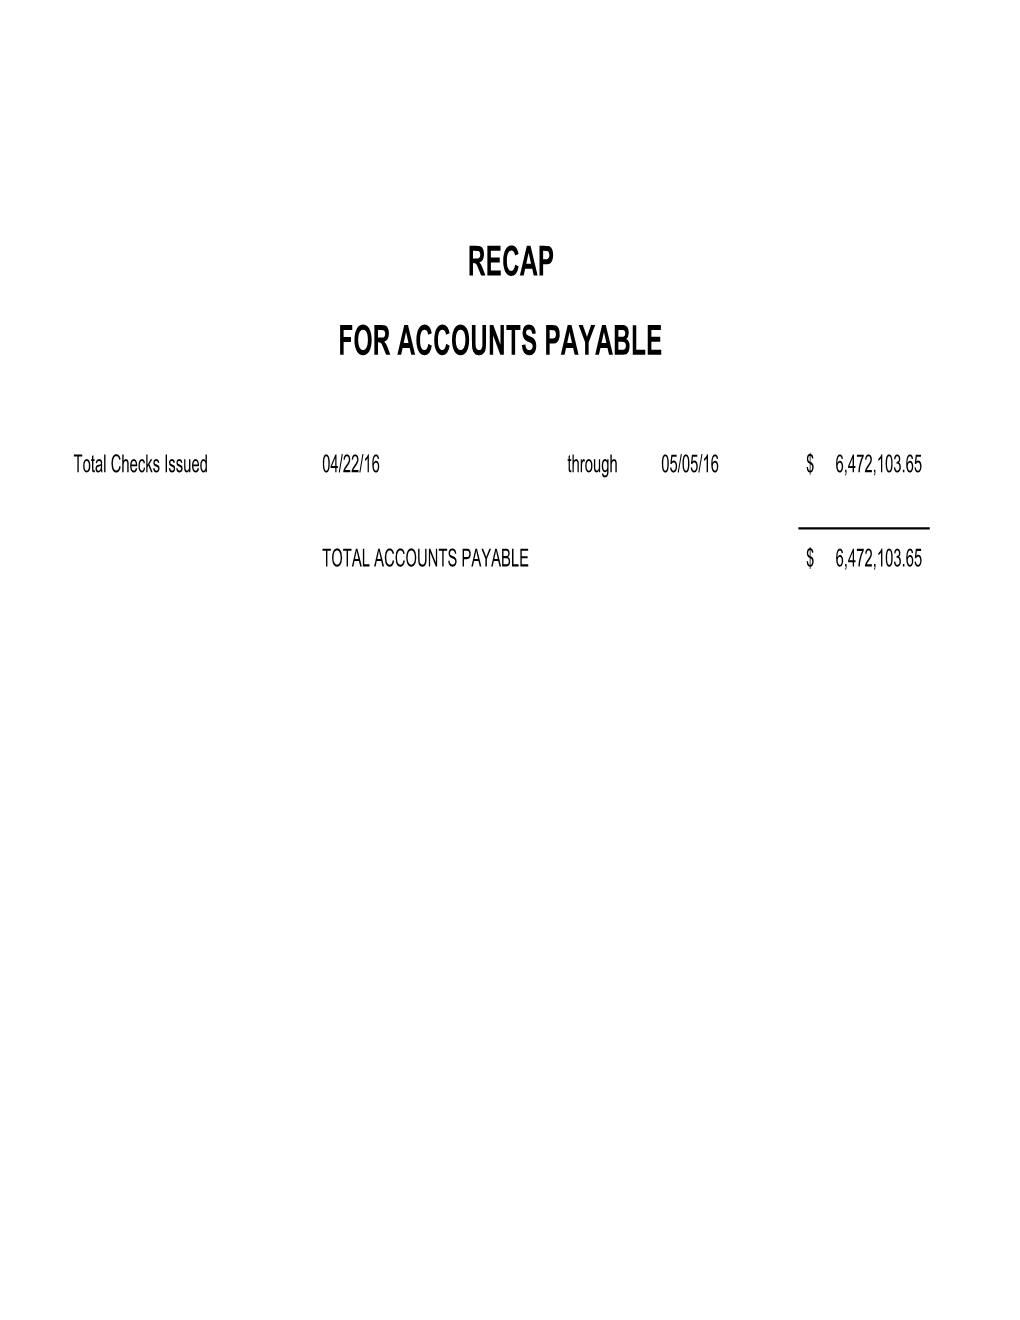 Accounts Payable Covering the Period April 22